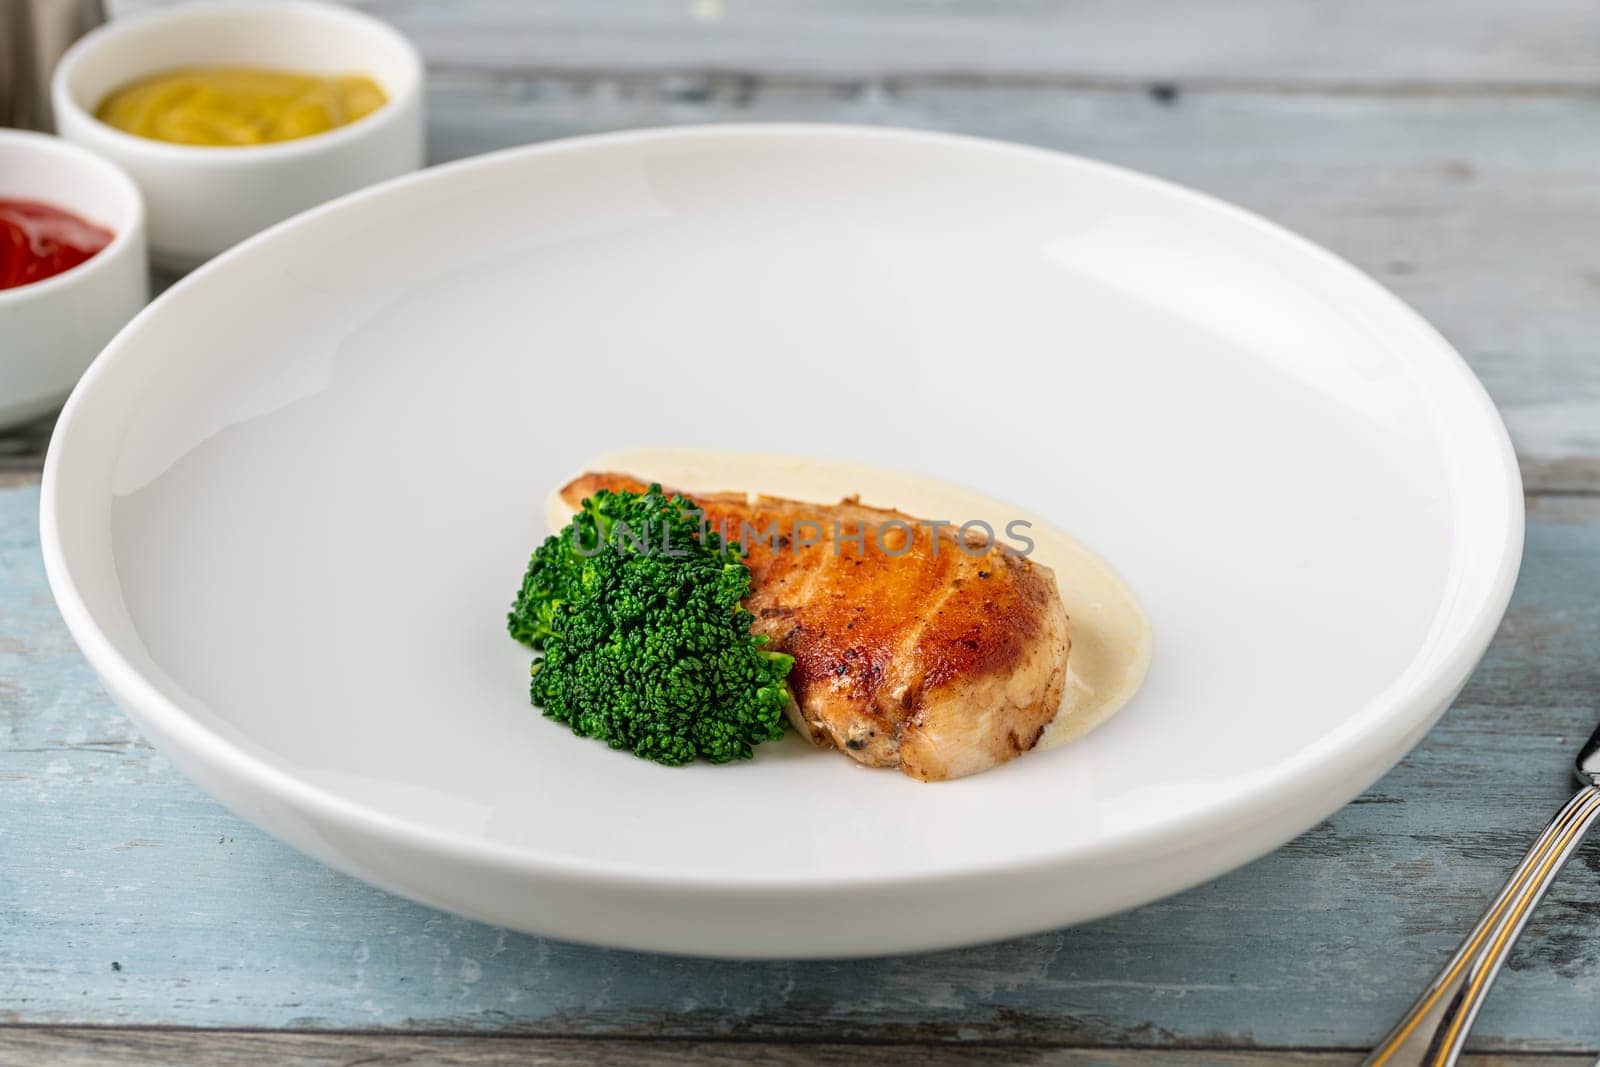 Grilled chicken breast with broccoli and sauce on a white porcelain plate